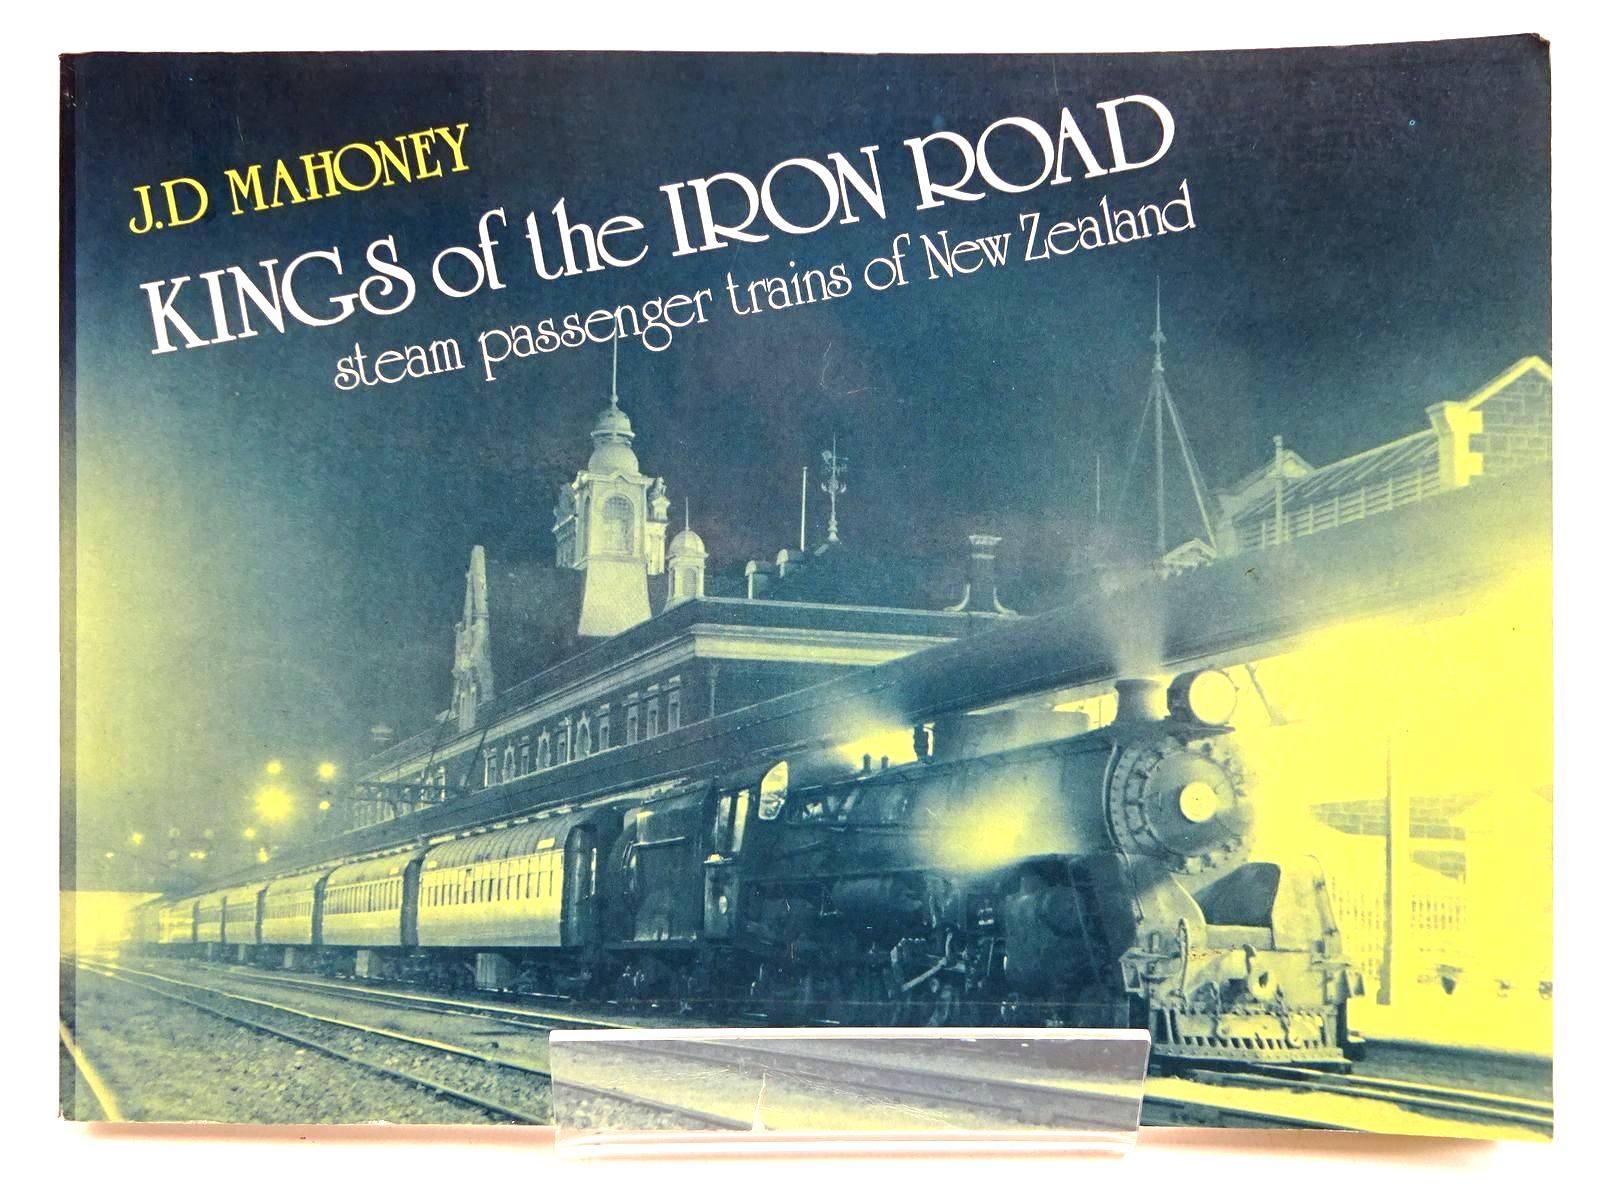 Photo of KINGS OF THE IRON ROAD STEAM PASSENGER TRAINS OF NEW ZEALAND written by Mahoney, J.D. published by The Dunmore Press (STOCK CODE: 2131472)  for sale by Stella & Rose's Books